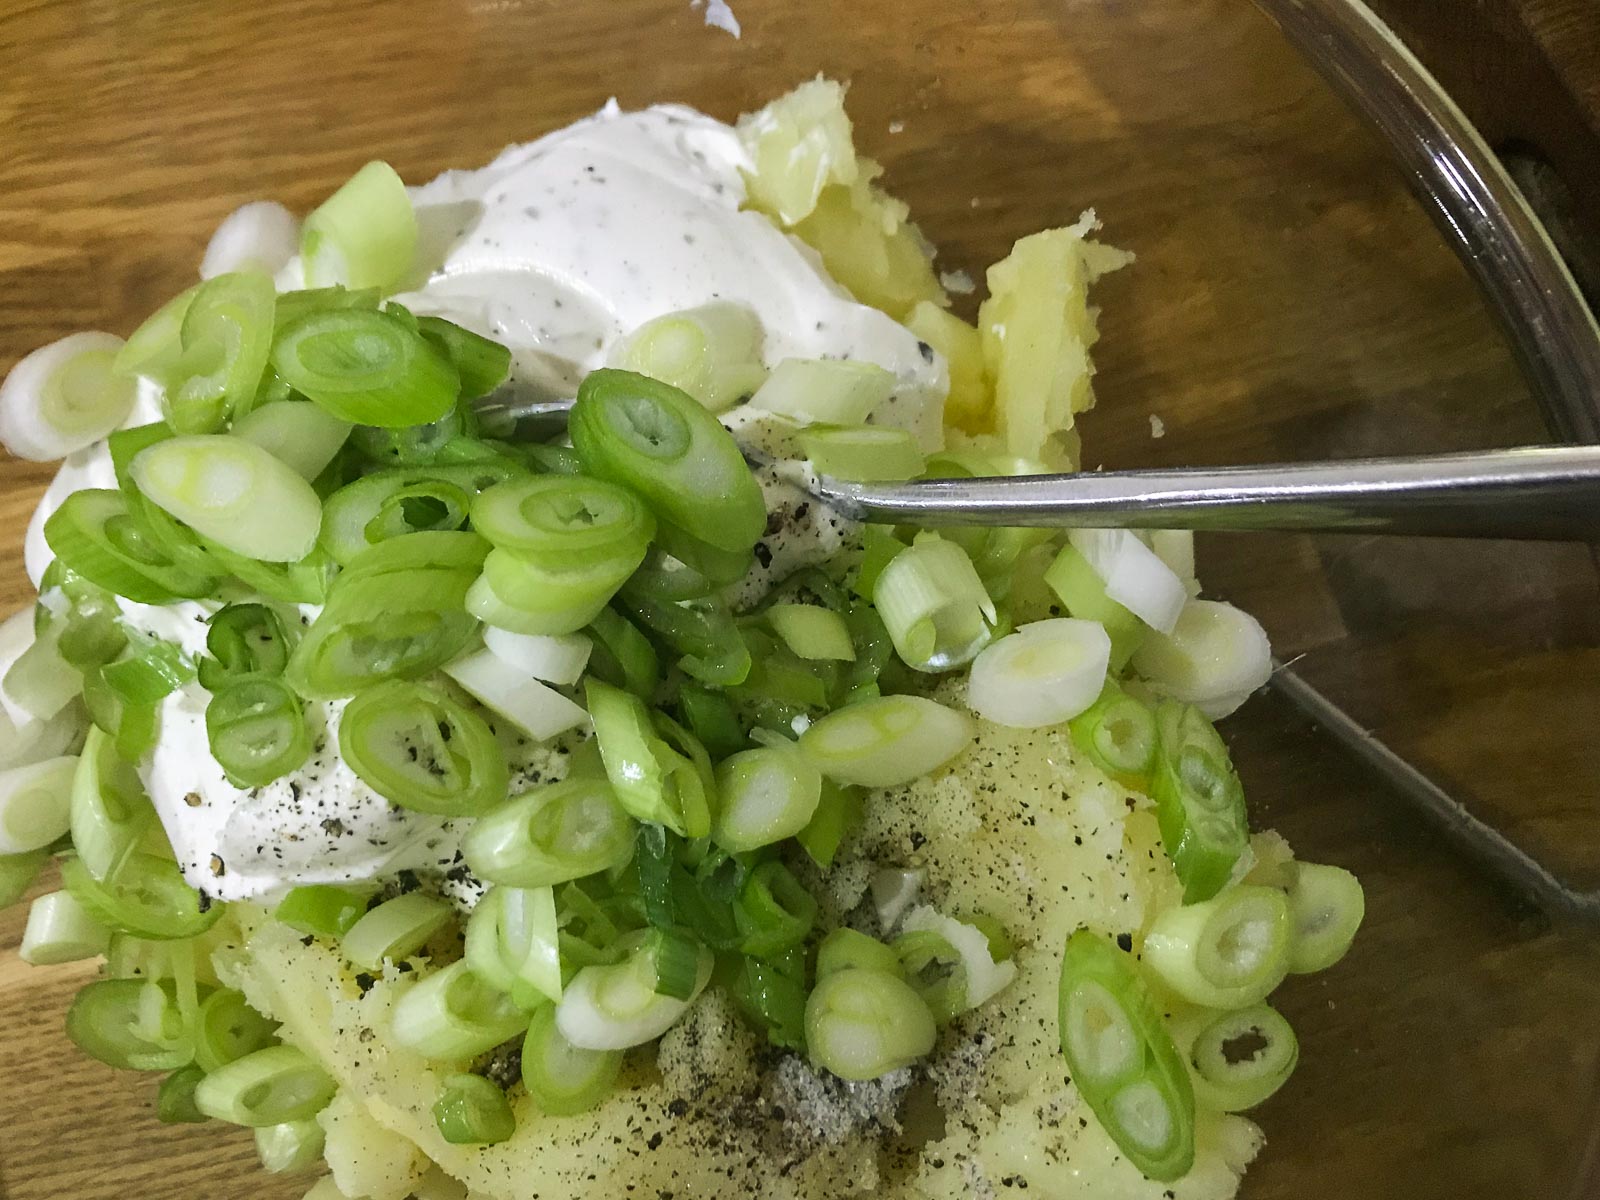 Mashed potato being mixed with spring onions, soft cheese, salt & pepper.